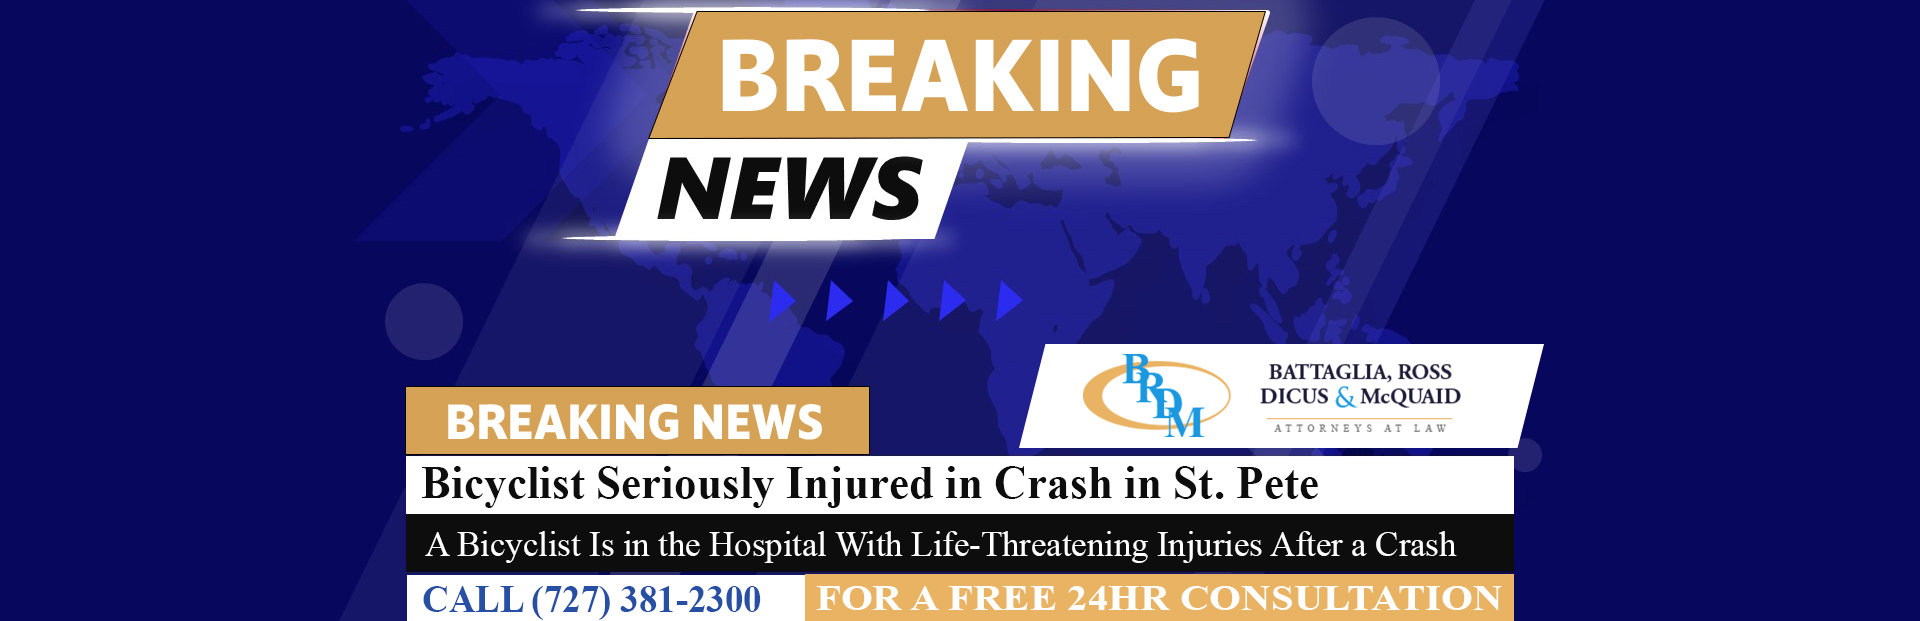 [12-21-22] Bicyclist Seriously Injured in Crash in St. Pete